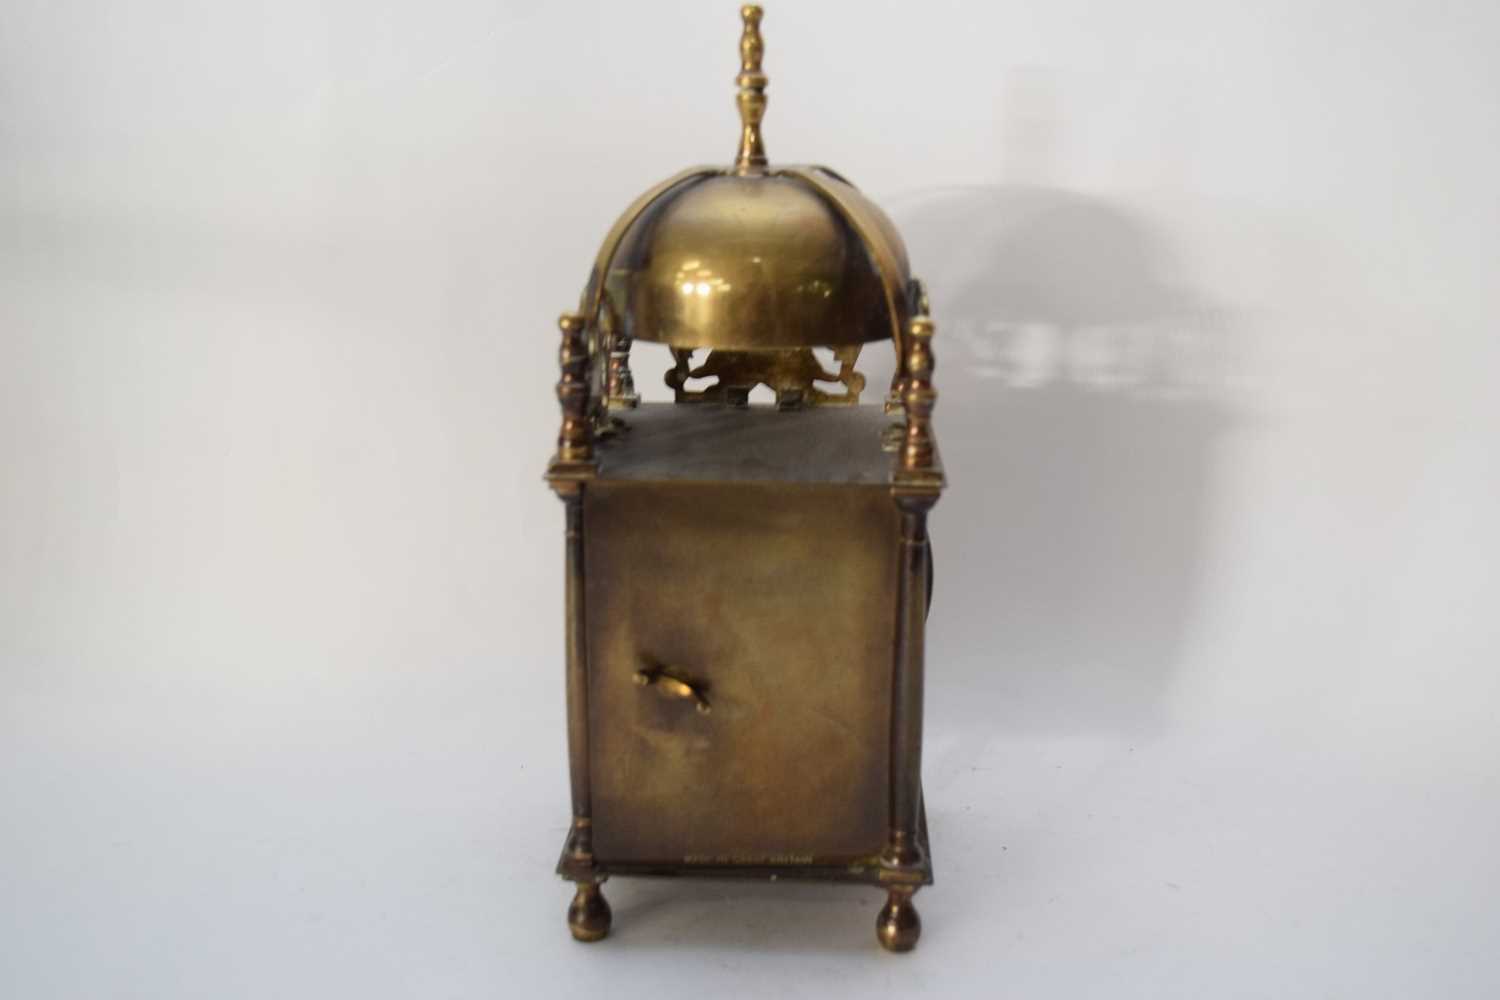 Lantern clock made by Smiths - Image 4 of 6